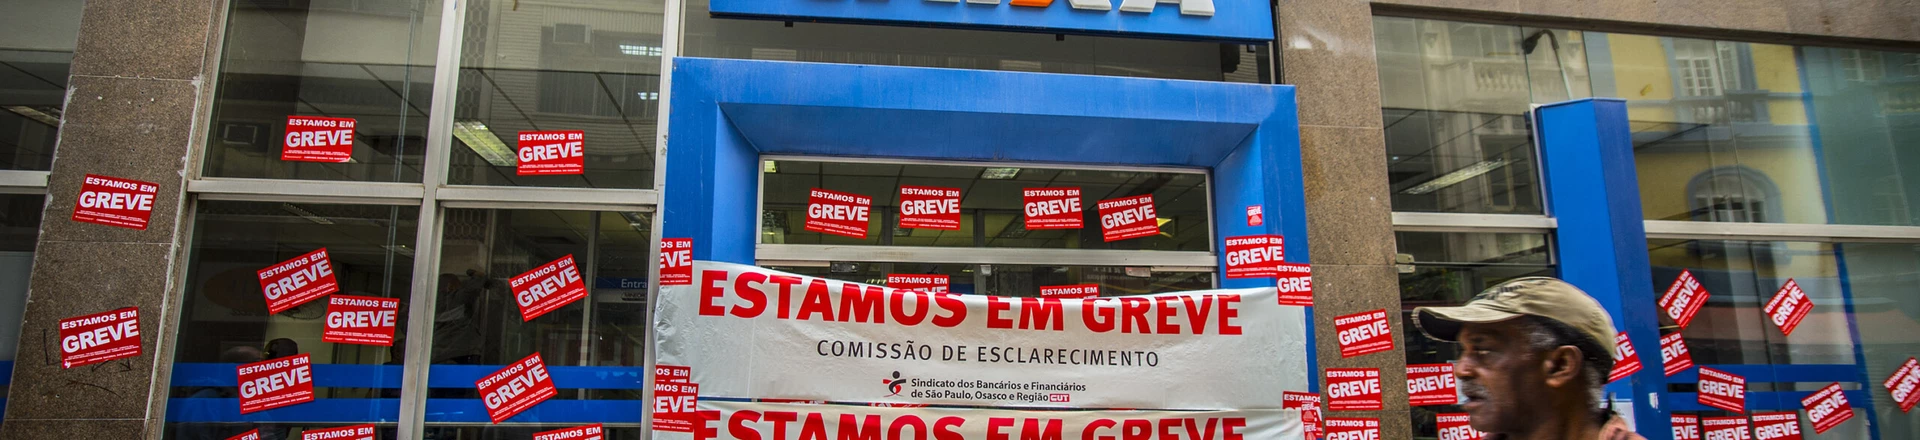 Posters placed in bank branch facade in Sao Paulo, Brazil, informing the strike of the category on September 6, 2016.More than 7,000 agencies stop throughout Brazil, bank went on indefinite strike from September 6.The first day of the strike of bank paralyzed the 7,359 operating branches across the country. The number is equivalent to 31.25% of total branches throughout Brazil, according to Central Bank data (Central Bank).Only in Sao Paulo, the movement ended the first day with a membership of more than 35,000 workers at 680 workplaces. (Photo by Cris Faga/NurPhoto via Getty Images)